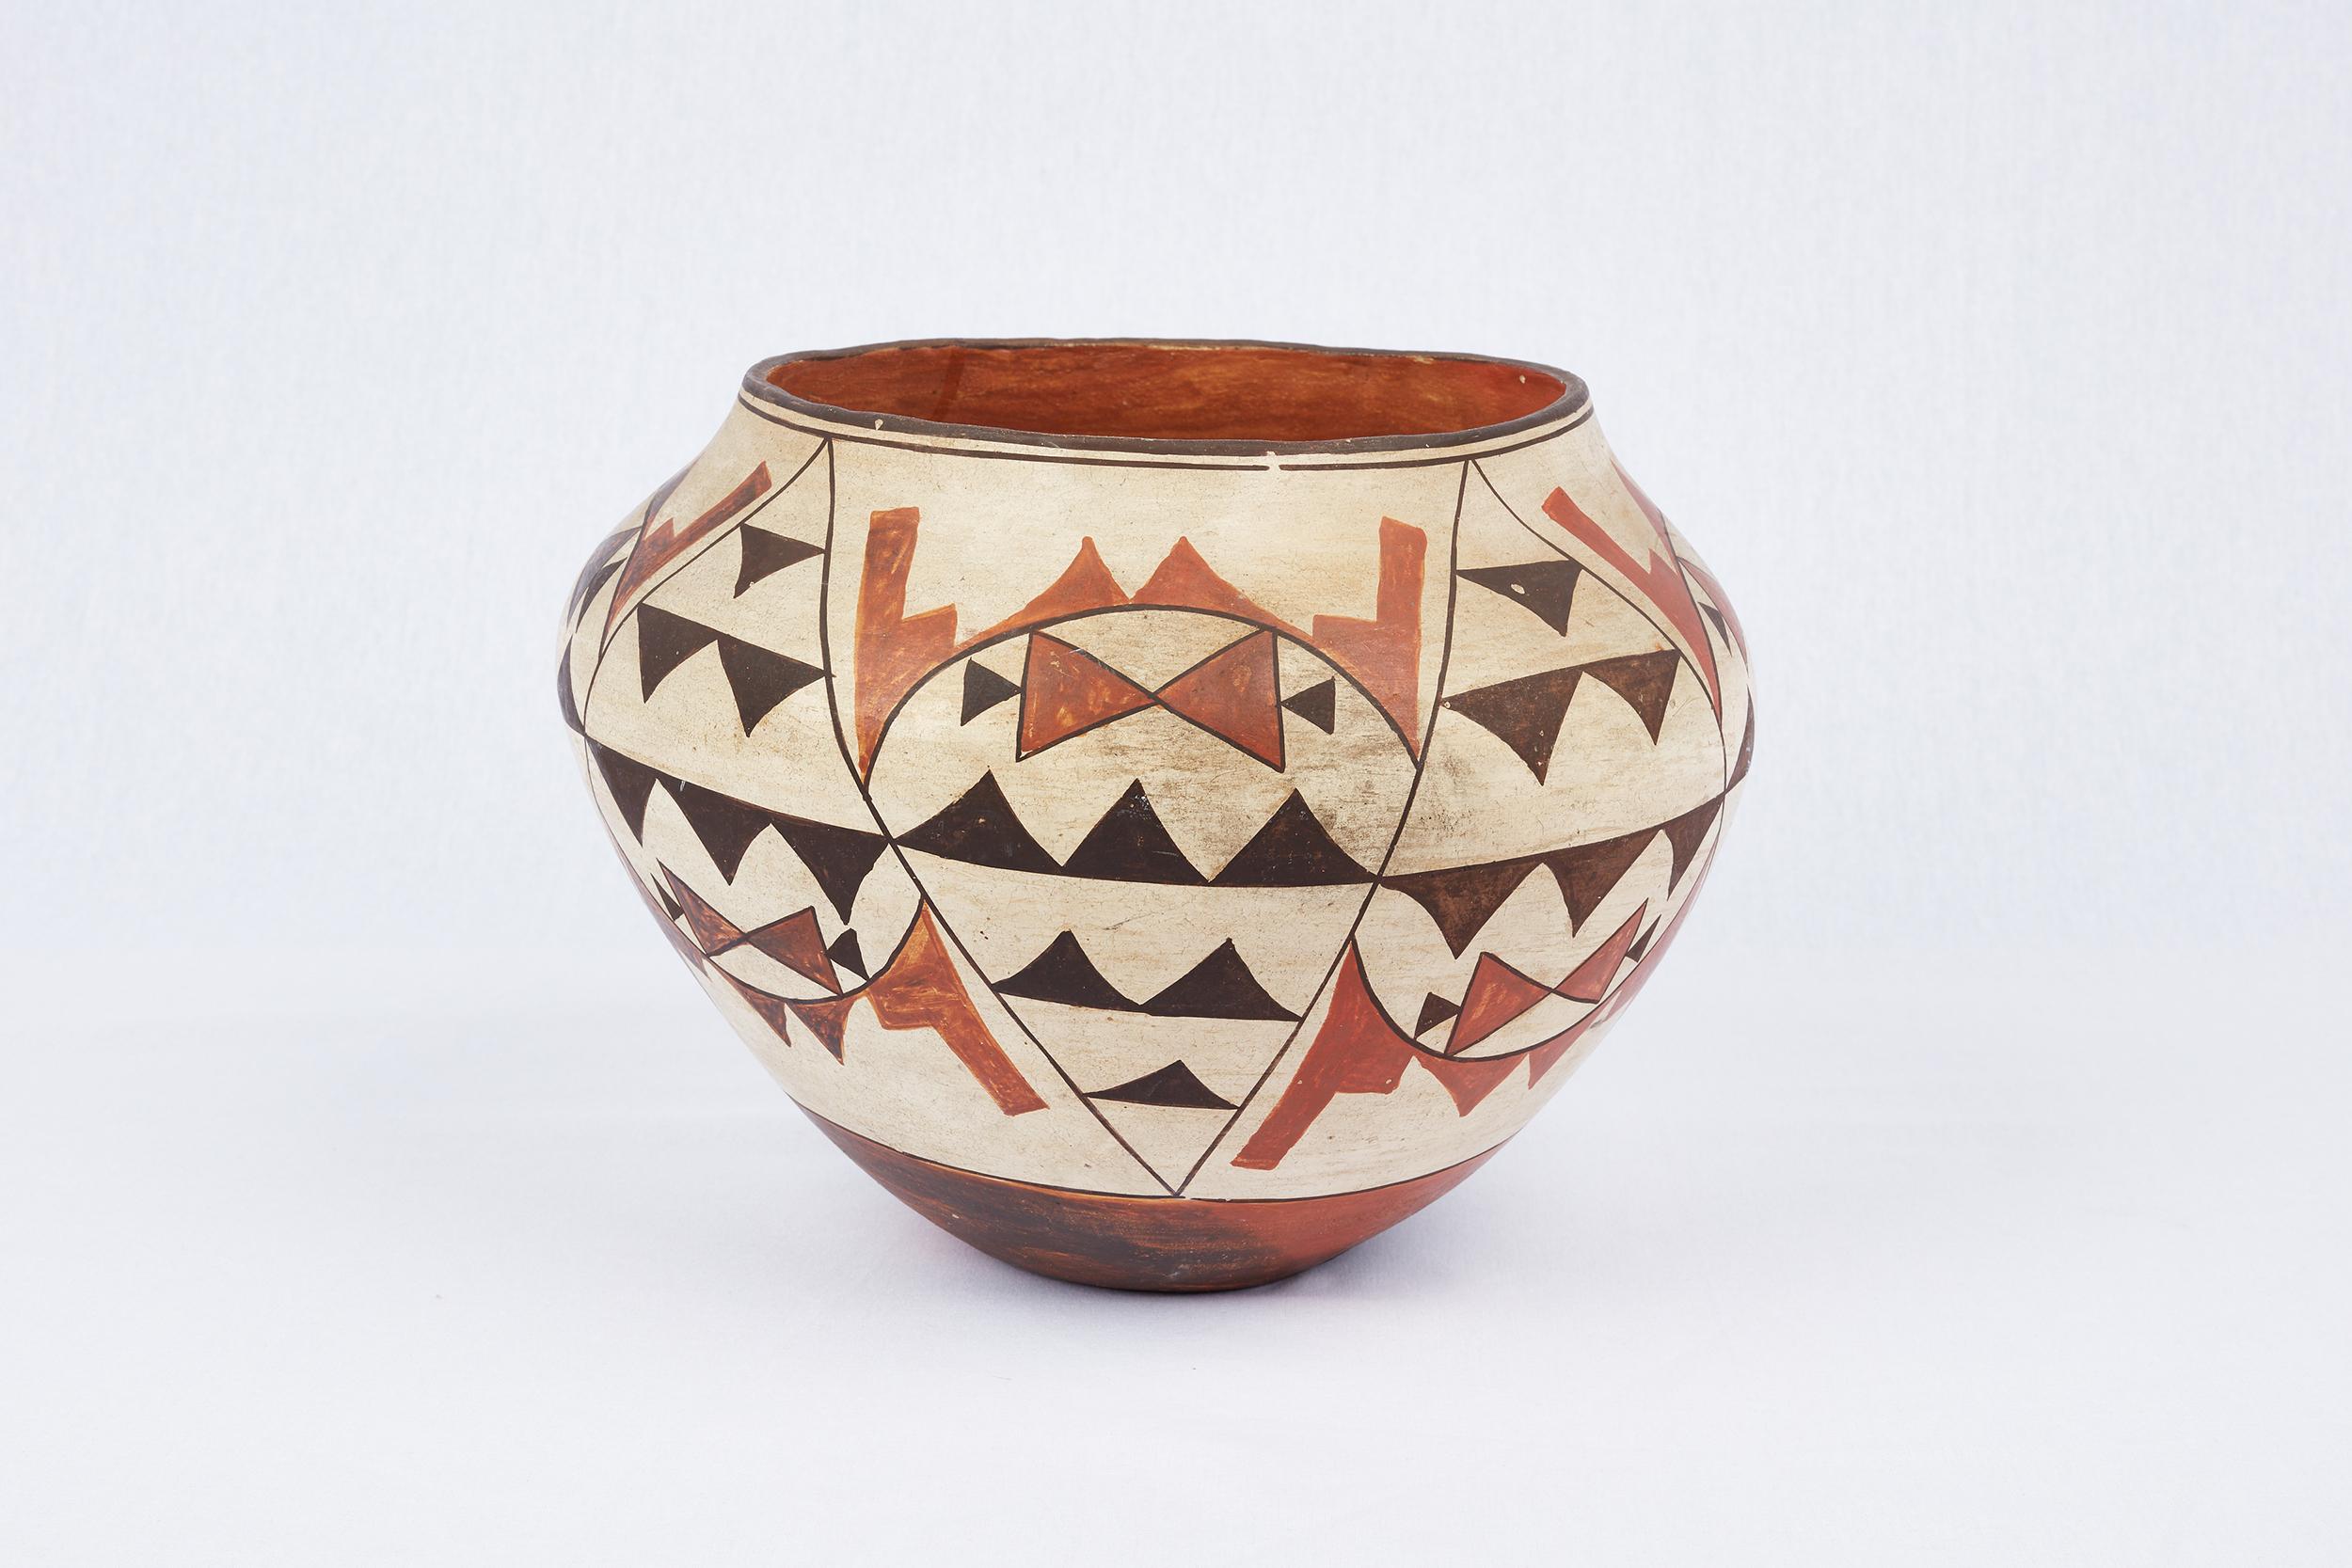 Large Vintage Acoma Polychrome Olla. I Purchased This Wonderful American Indian Pot From The Original Owner's Estate.